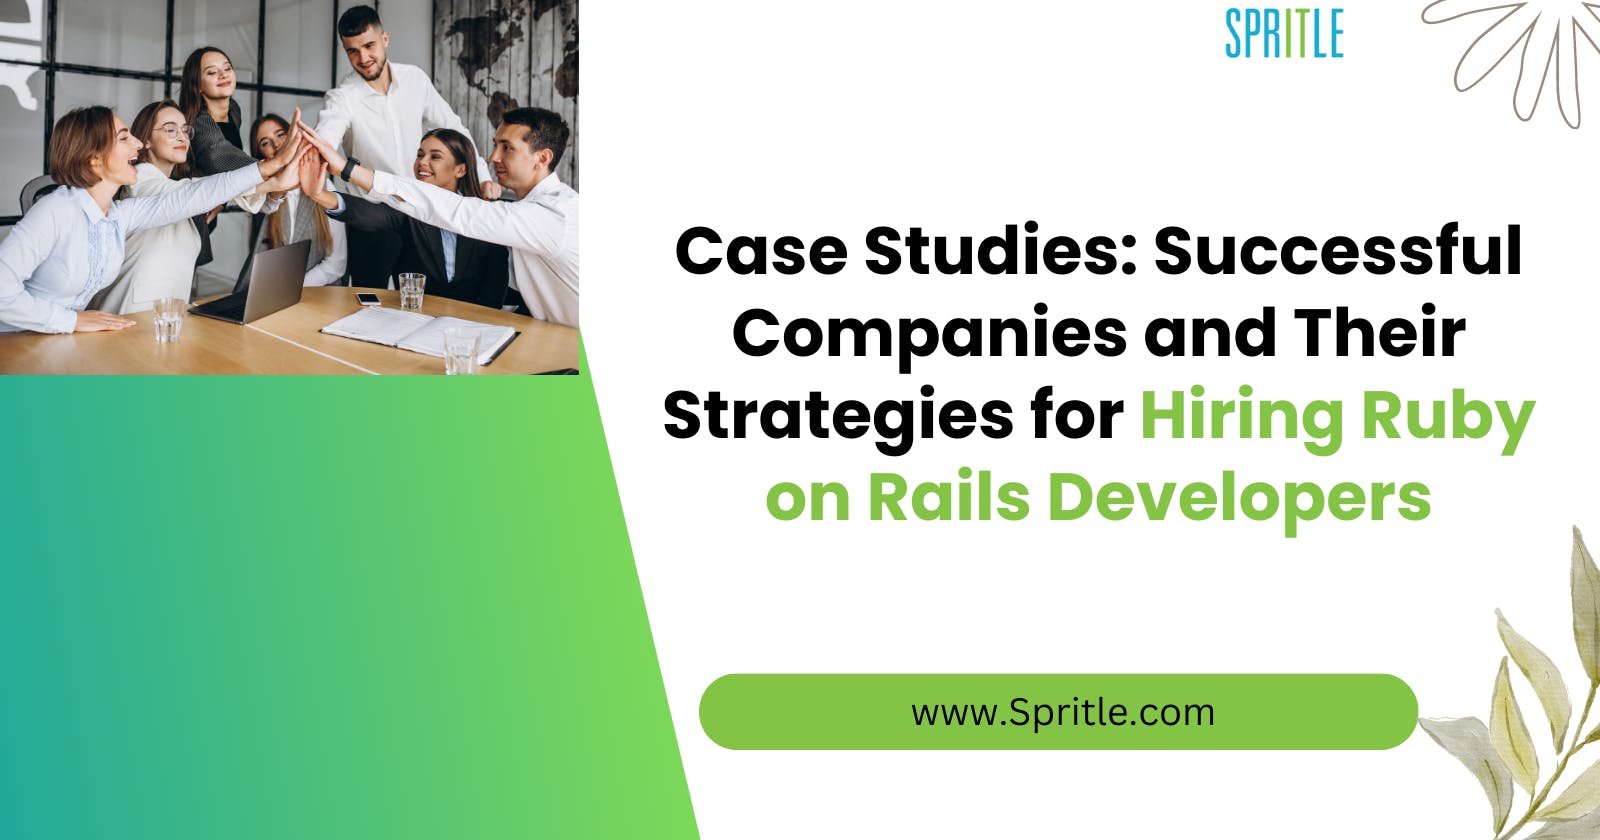 Case Studies: Successful Companies and Their Strategies for Hiring Ruby on Rails Developers